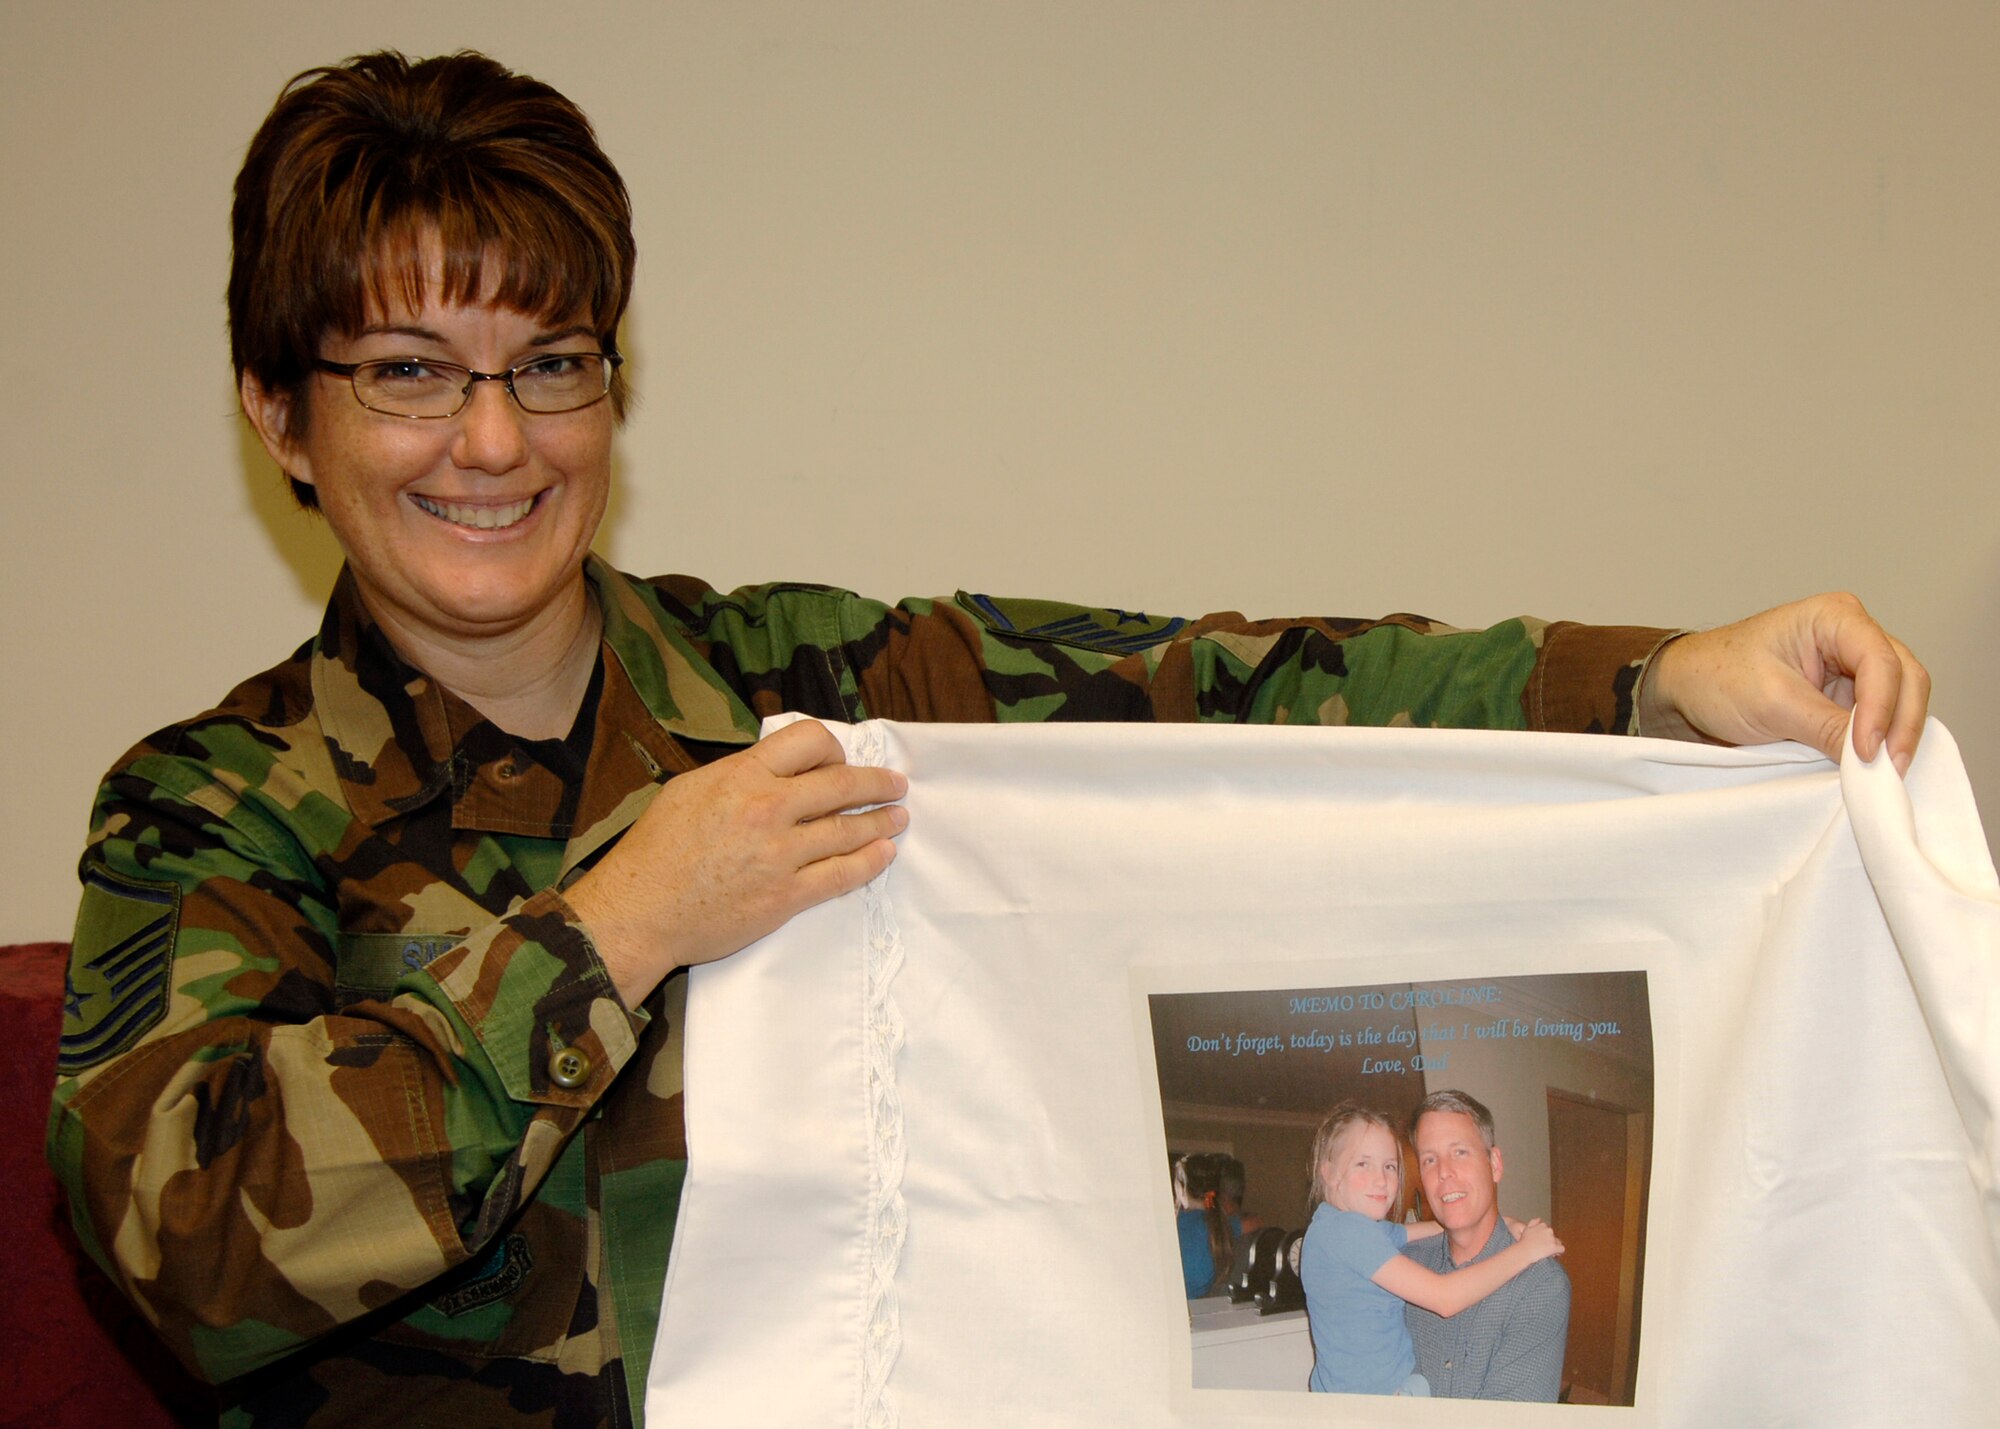 Master Sgt. Susan Smith, 22nd Mission Support Squadron, holds up a finished, etched pillow case Aug 29.  Operation Rest is a program at the McConnell Airmen and Family Readiness Center allowing family members of deployed Airmen to either bring in photos or send photos through e-mail to the AFRC so the images can be pressed onto a pillowcase or T-shirt along with a personal message. (Photo by Airman 1st Class Laura Suttles)